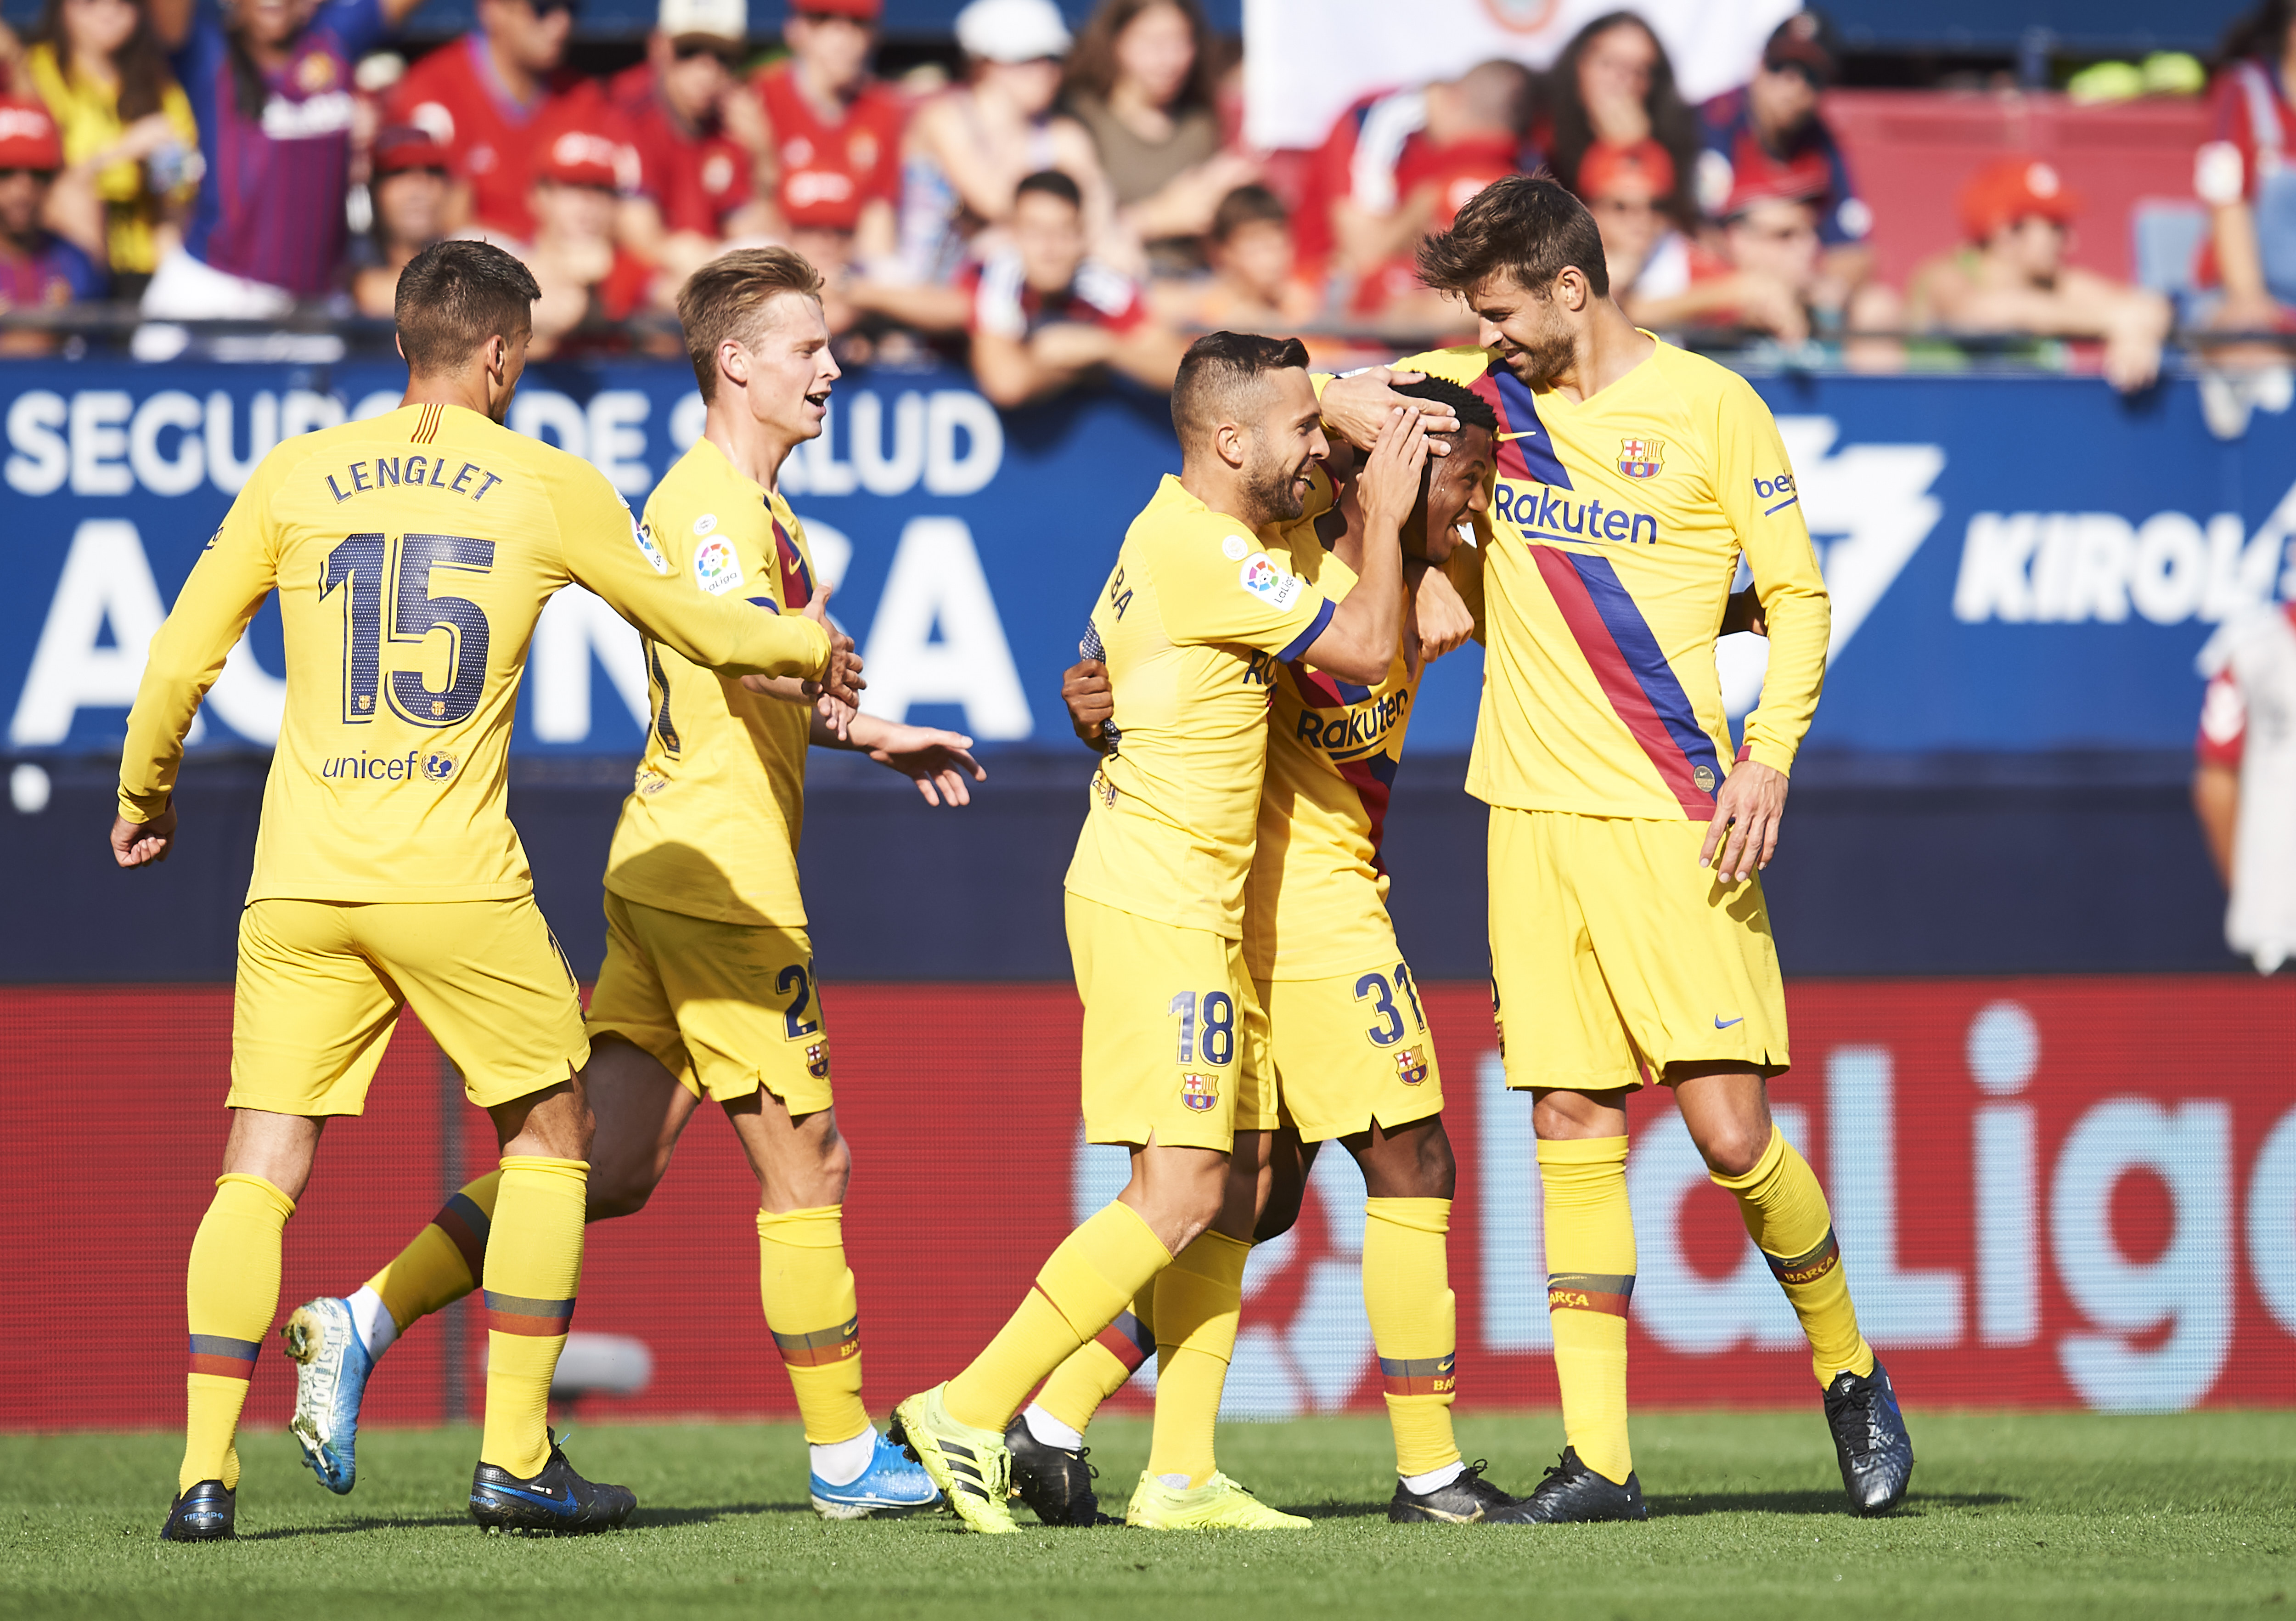 PAMPLONA, SPAIN - AUGUST 31: Anssumane Fati of FC Barcelona celebrates with teammates Jordi Alba and Gerard Pique after scoring the first goal of his team during the Liga match between CA Osasuna and FC Barcelona at Estadio Reyno de Navarra on August 31, 2019 in Pamplona, Spain. (Photo by Juan Manuel Serrano Arce/Getty Images)